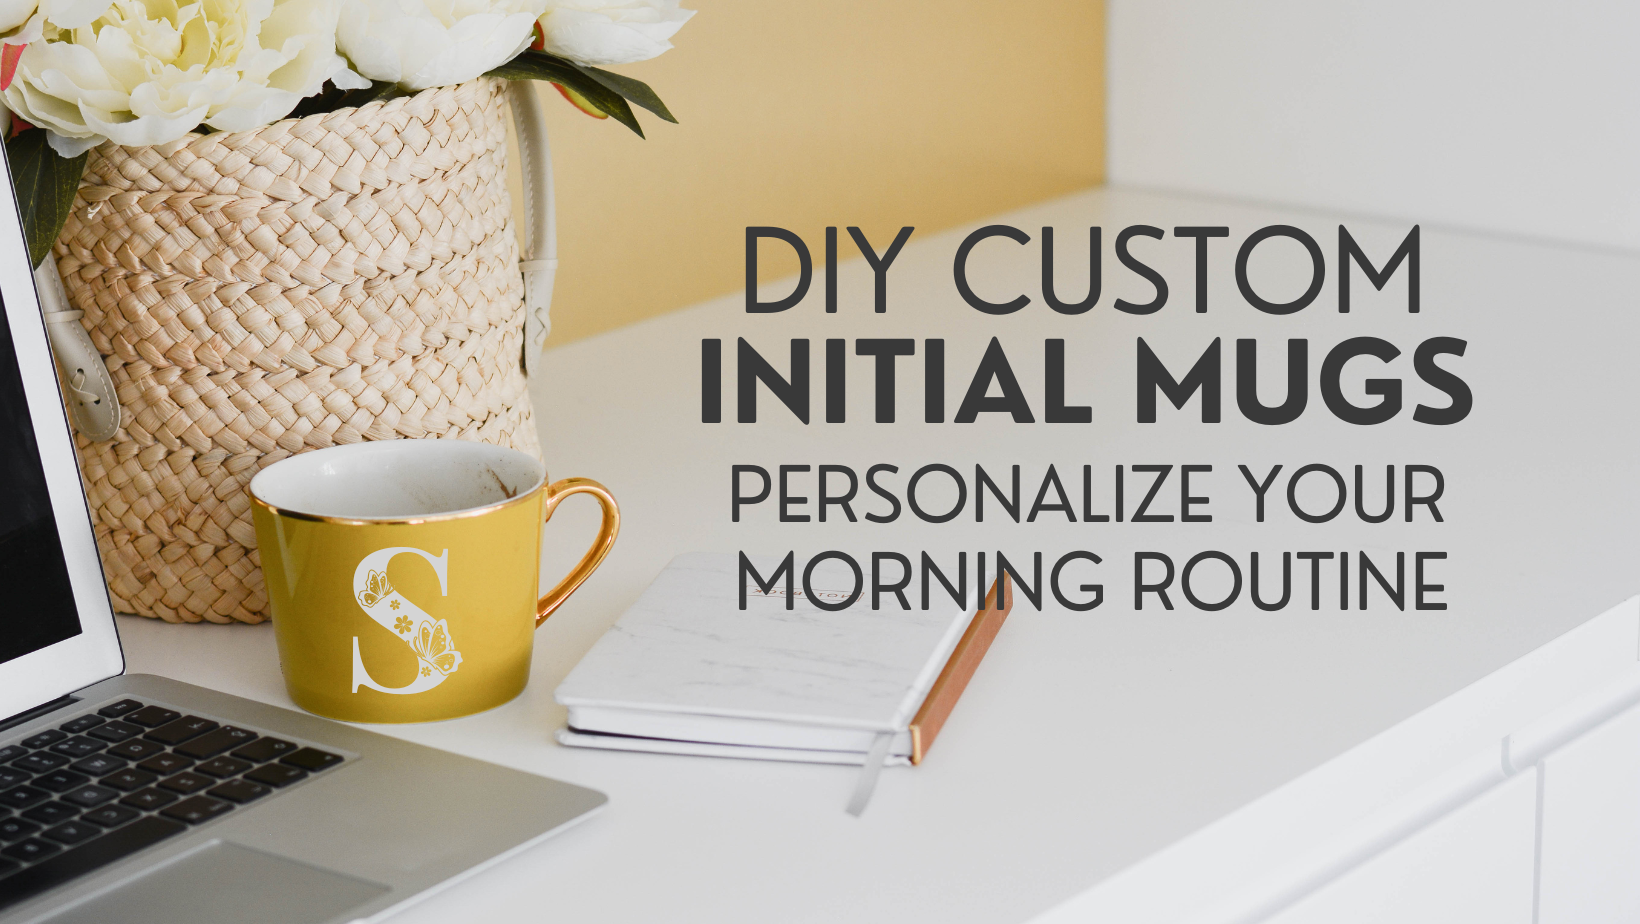 DIY Custom Initial Mugs: Personalize Your Morning Routine